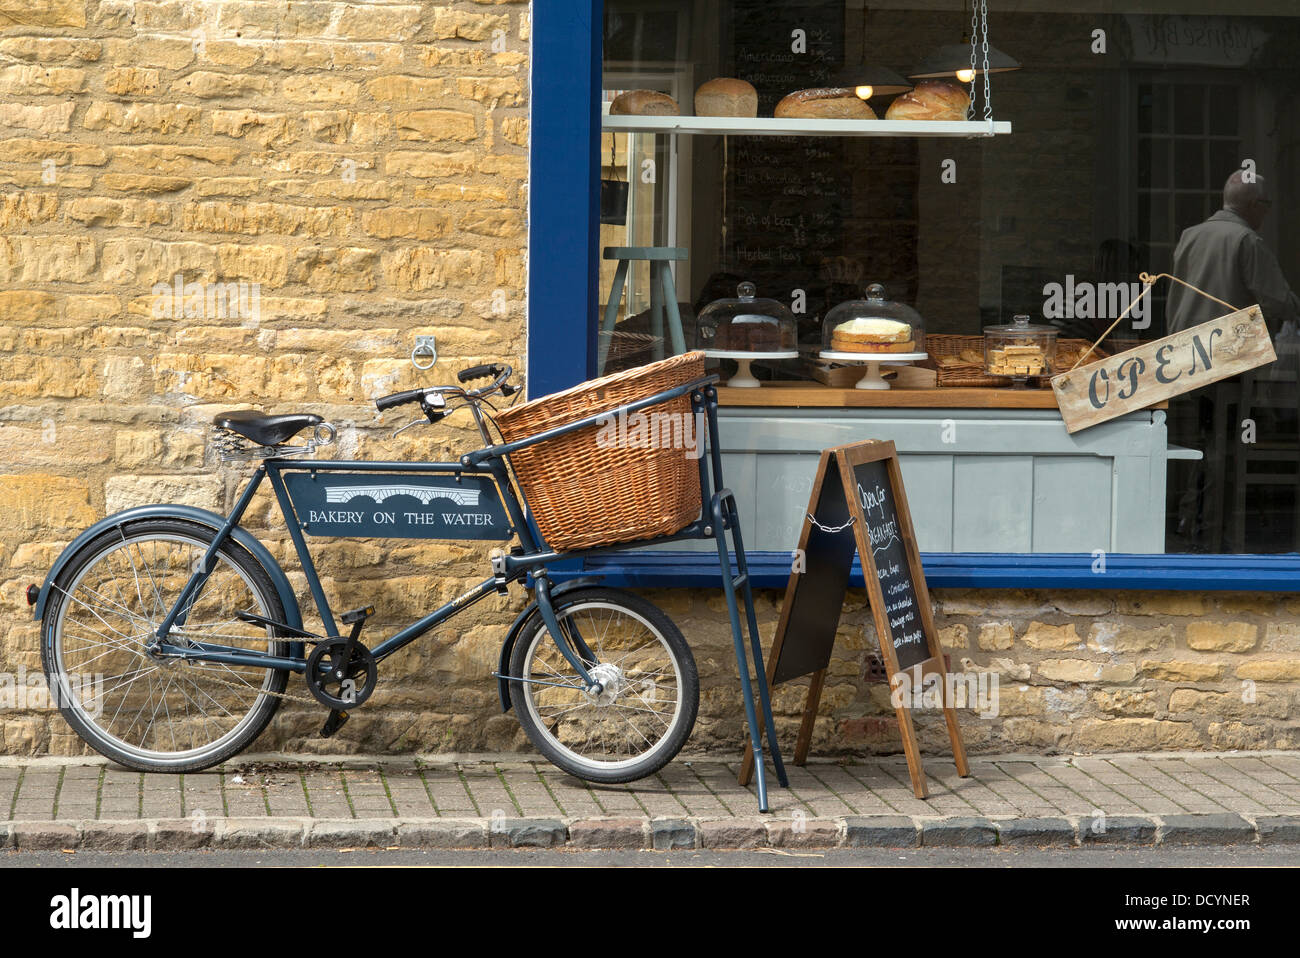 Bakery shop. Bakery on the Water. Bourton on the water. Cotswolds. Gloucestershire, England Stock Photo